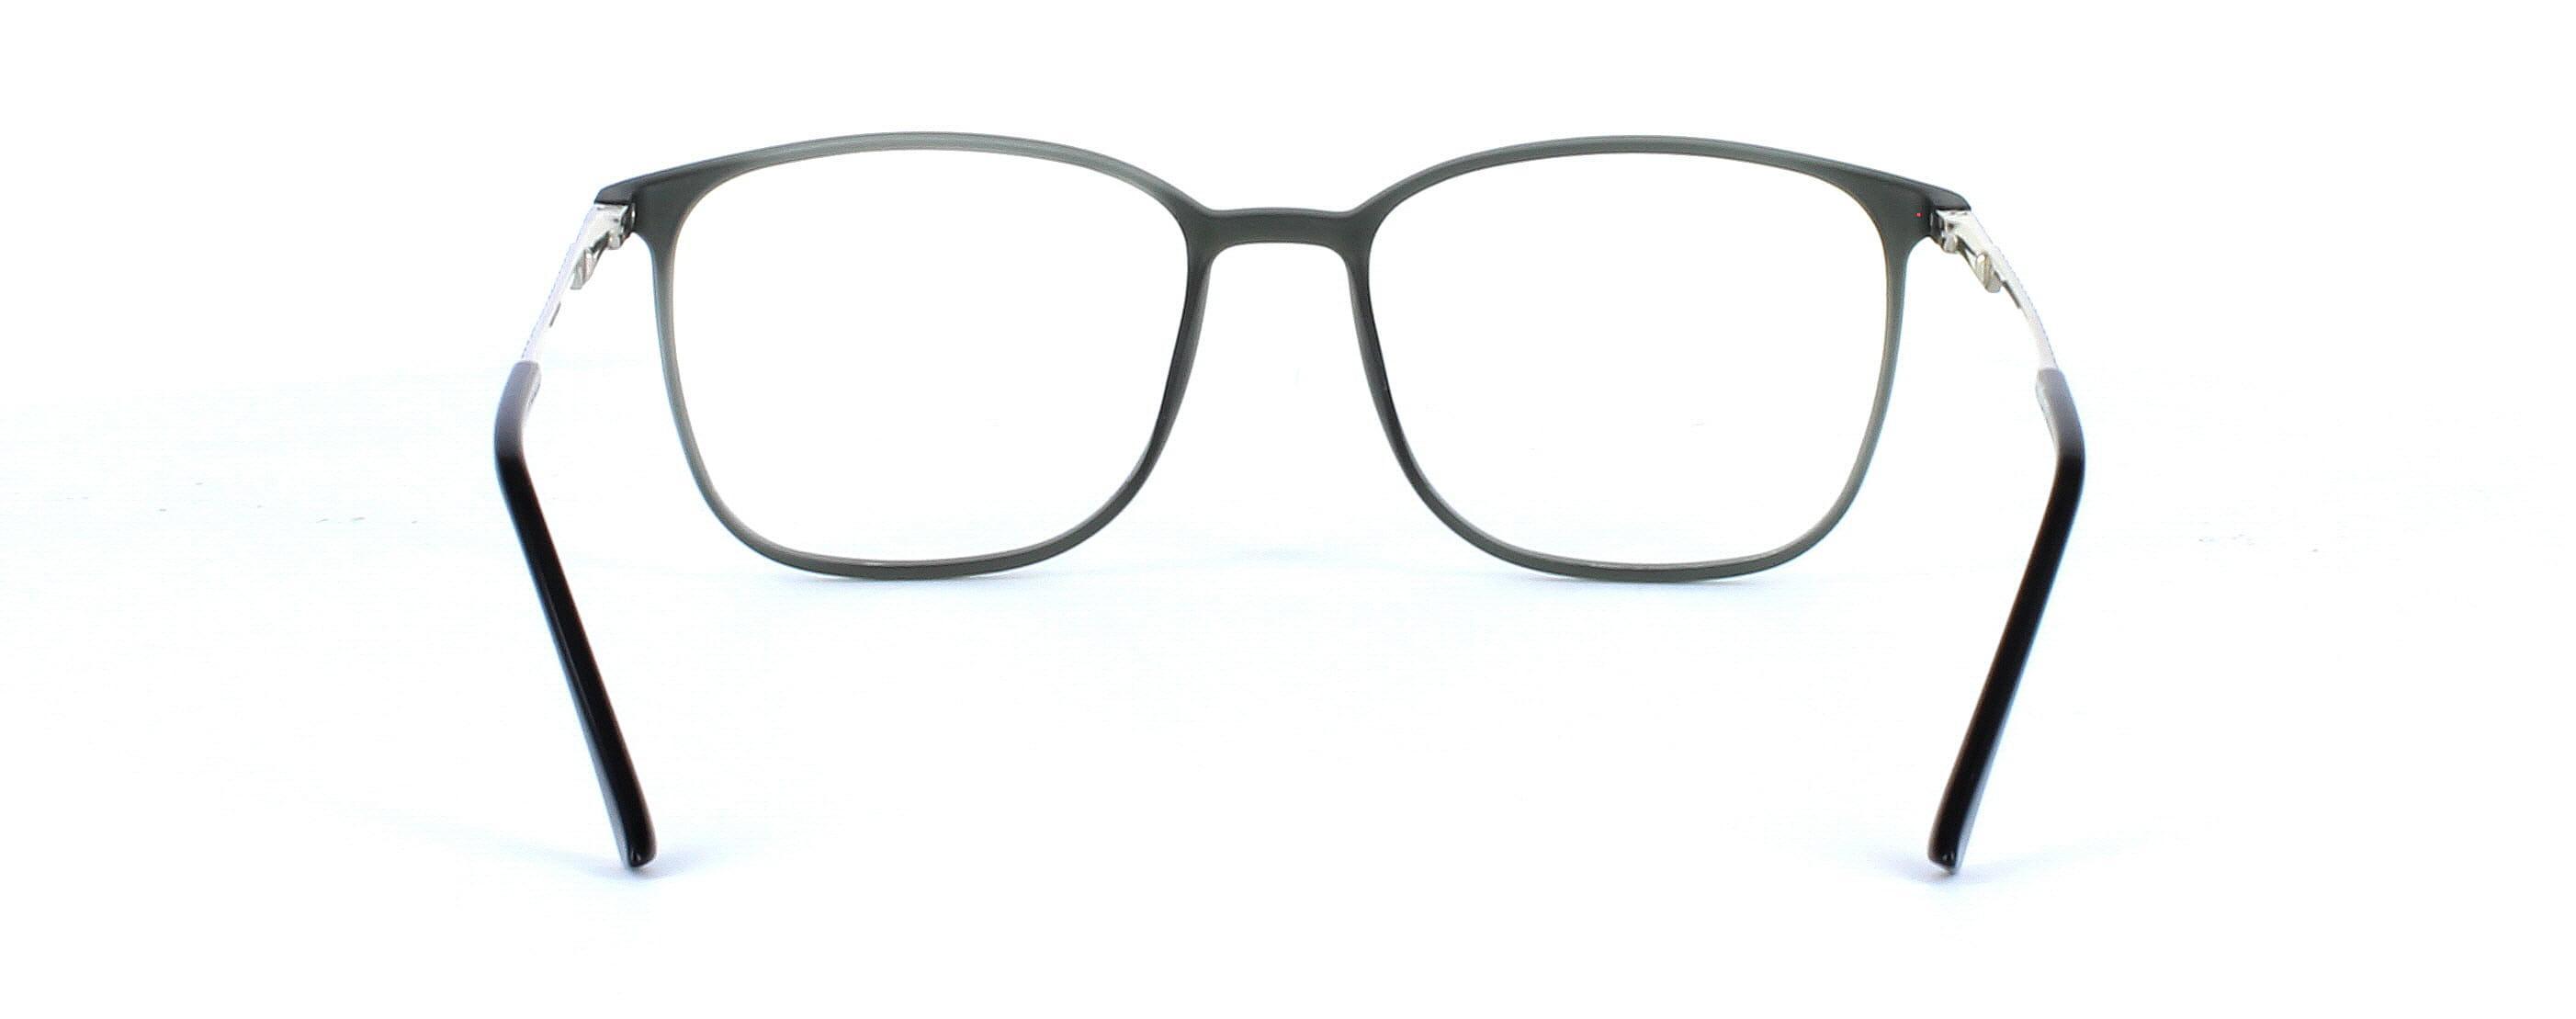 Ceres - square shaped plastic unisex glasses here in grey - image 3